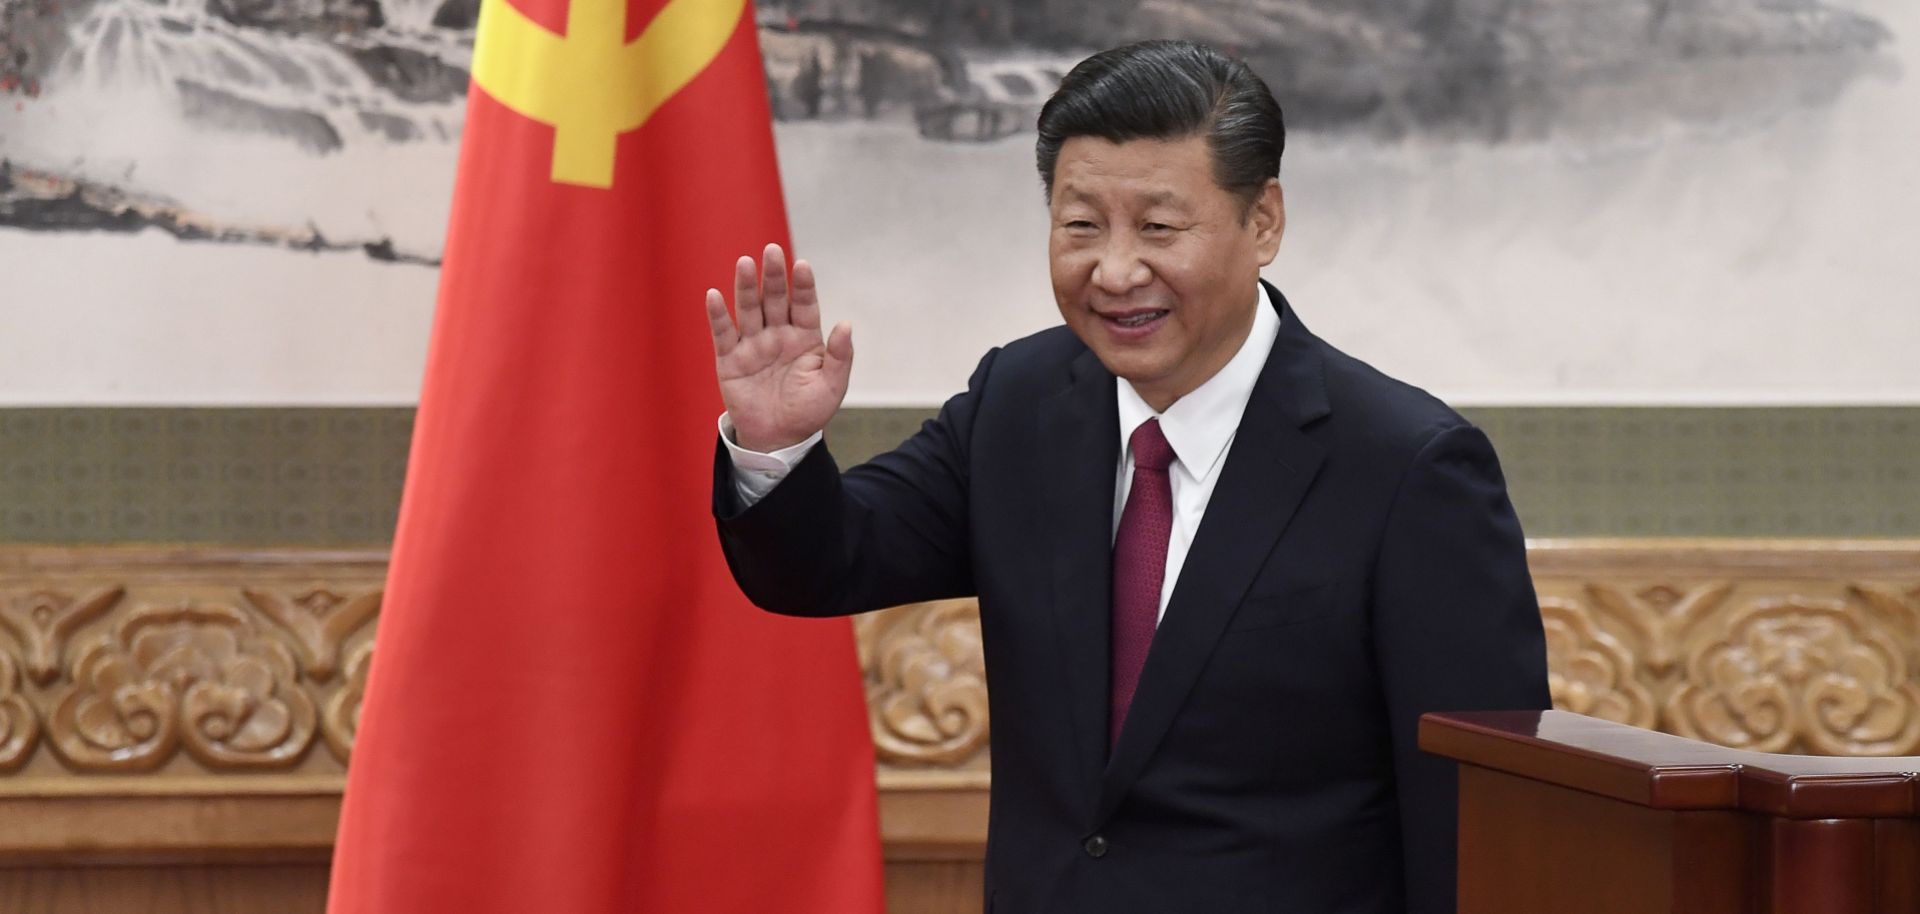 Chinese President Xi Jinping waves after introducing the new members of China's top decision-making body, the Communist Party's Politburo Standing Committee, on Oct. 25 in Beijing.